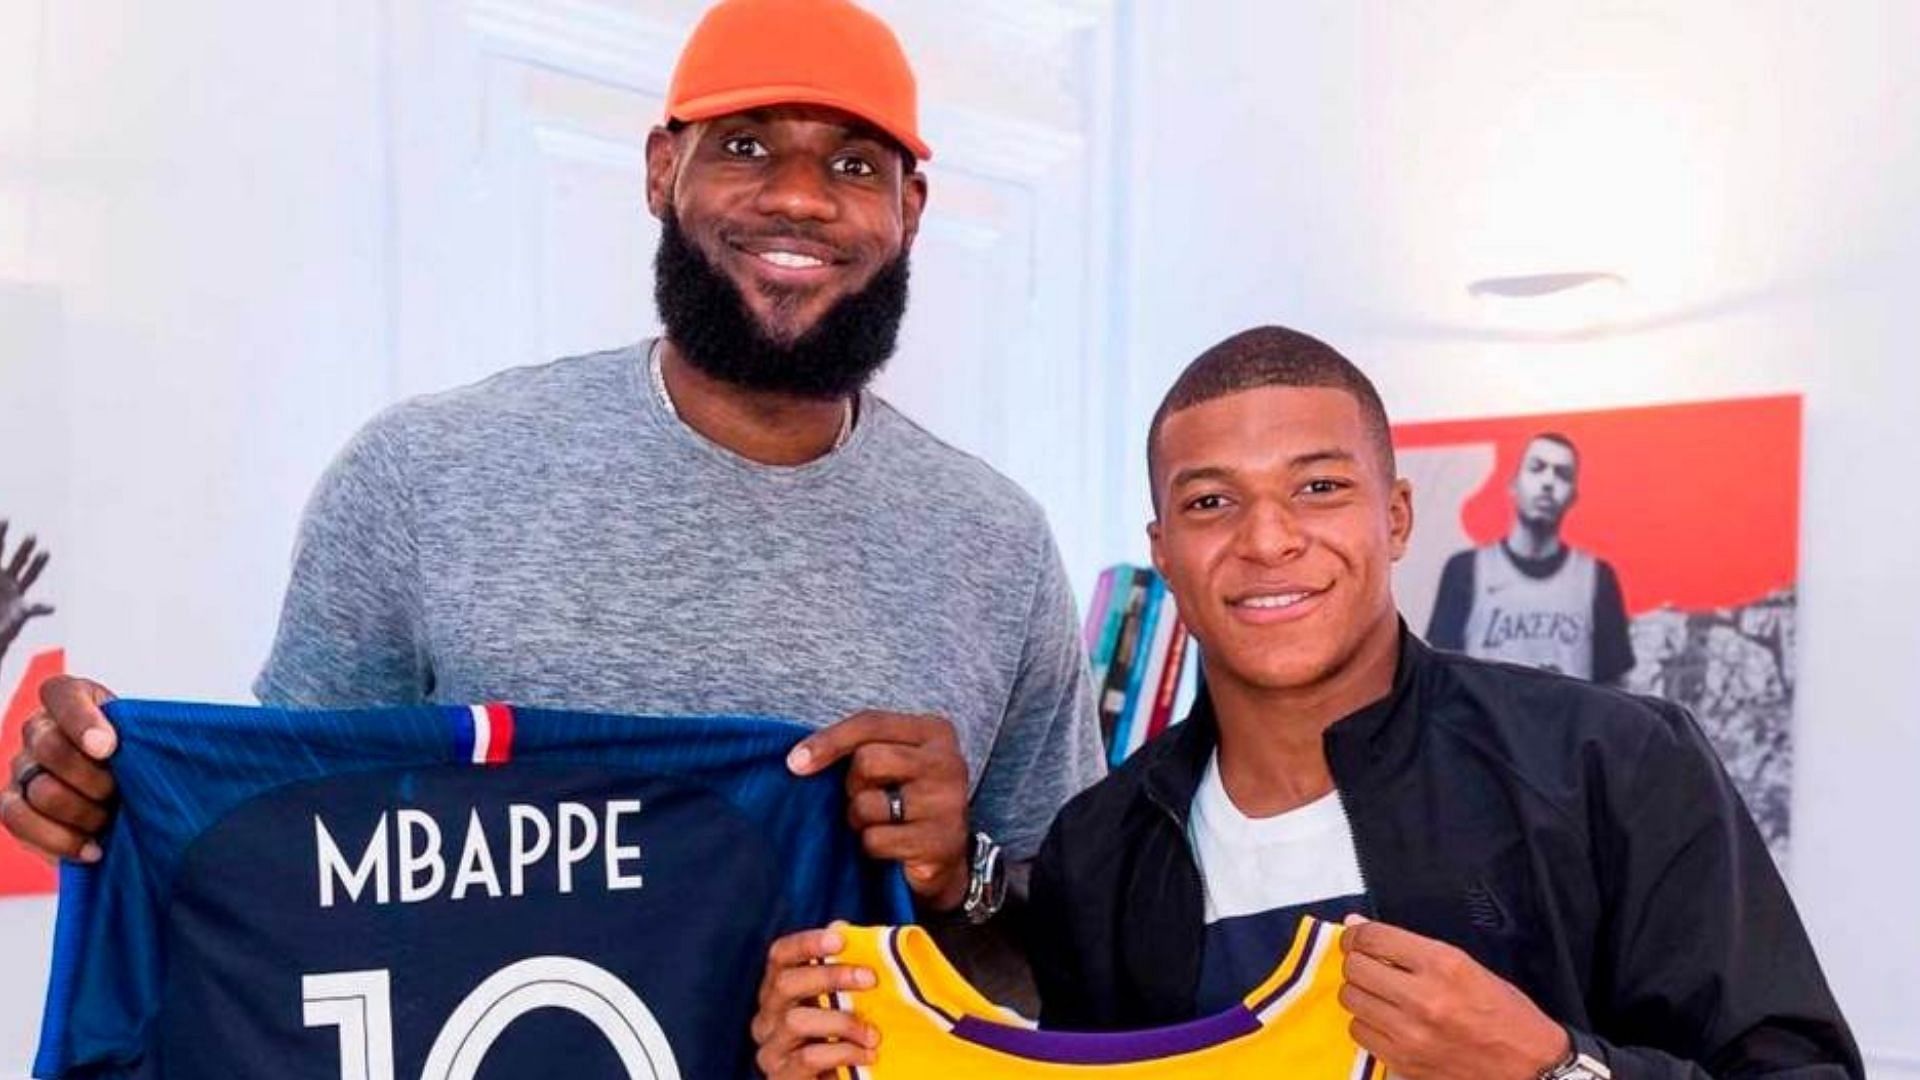 LeBron James of the LA Lakers and Kylian Mbappe of PSG exchanging their jerseys